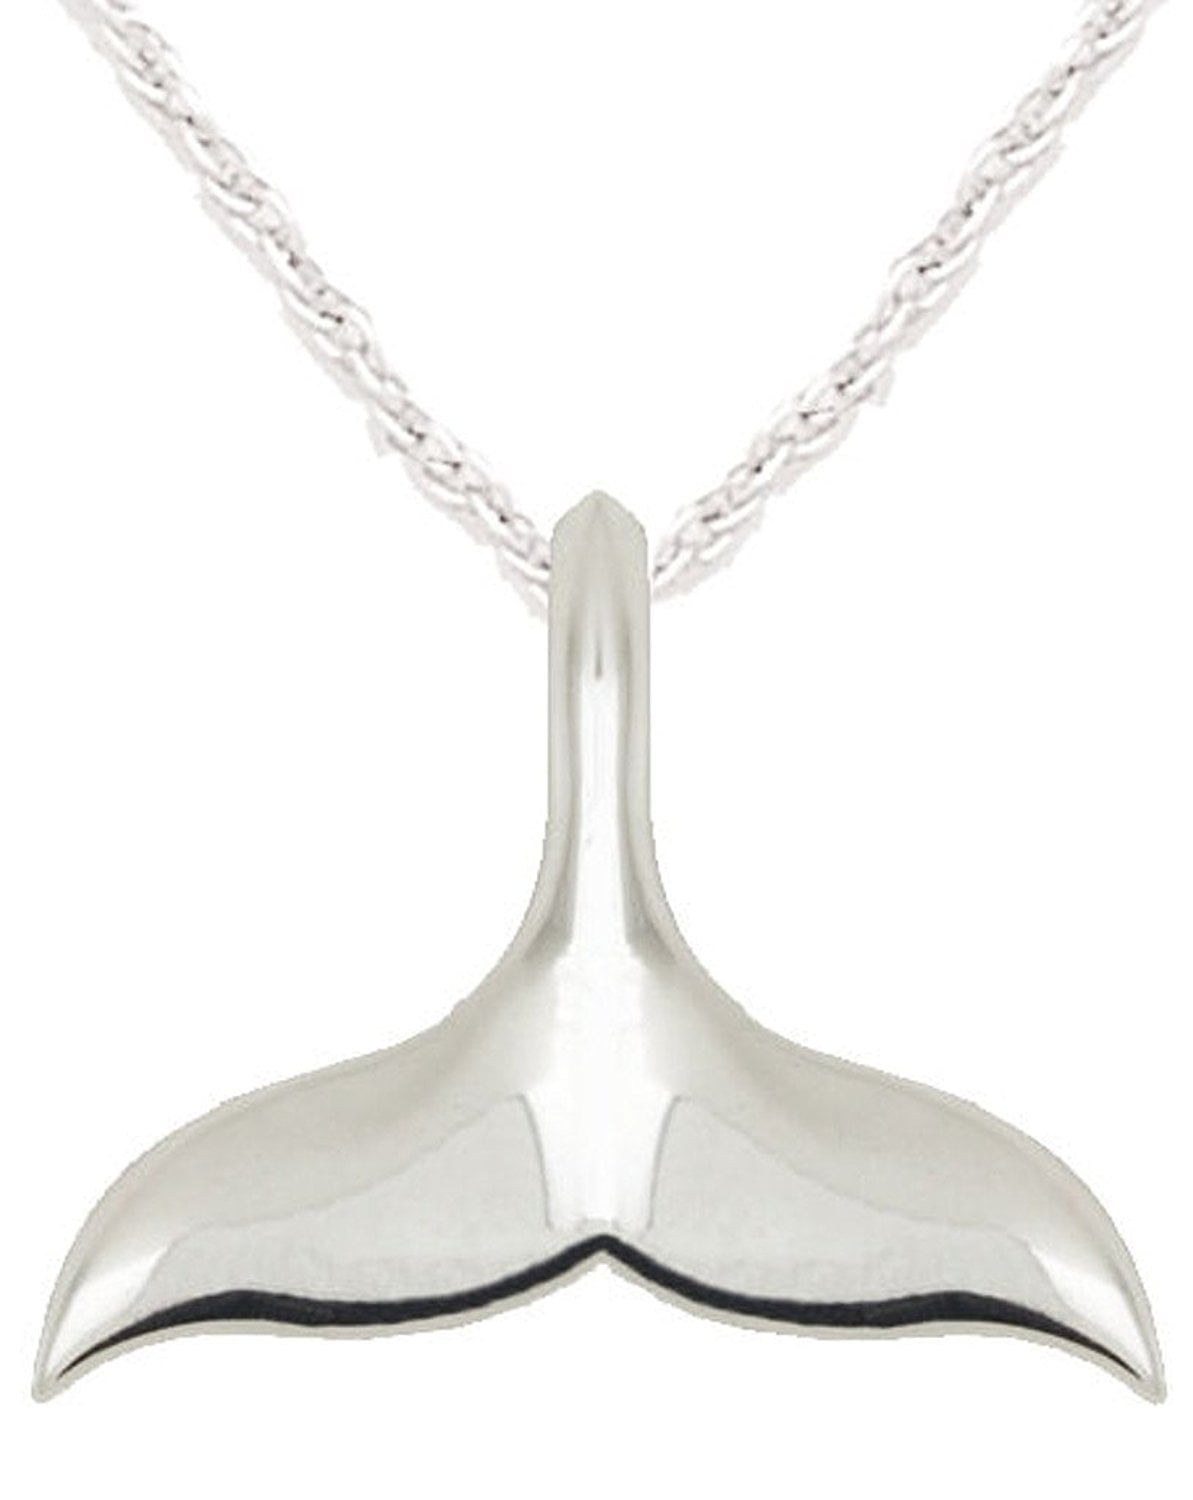 US Jewels And Gems Ladies 925 Sterling Silver Inlaid Whale Tale Pendant with Chain Necklace 18in to 24in 